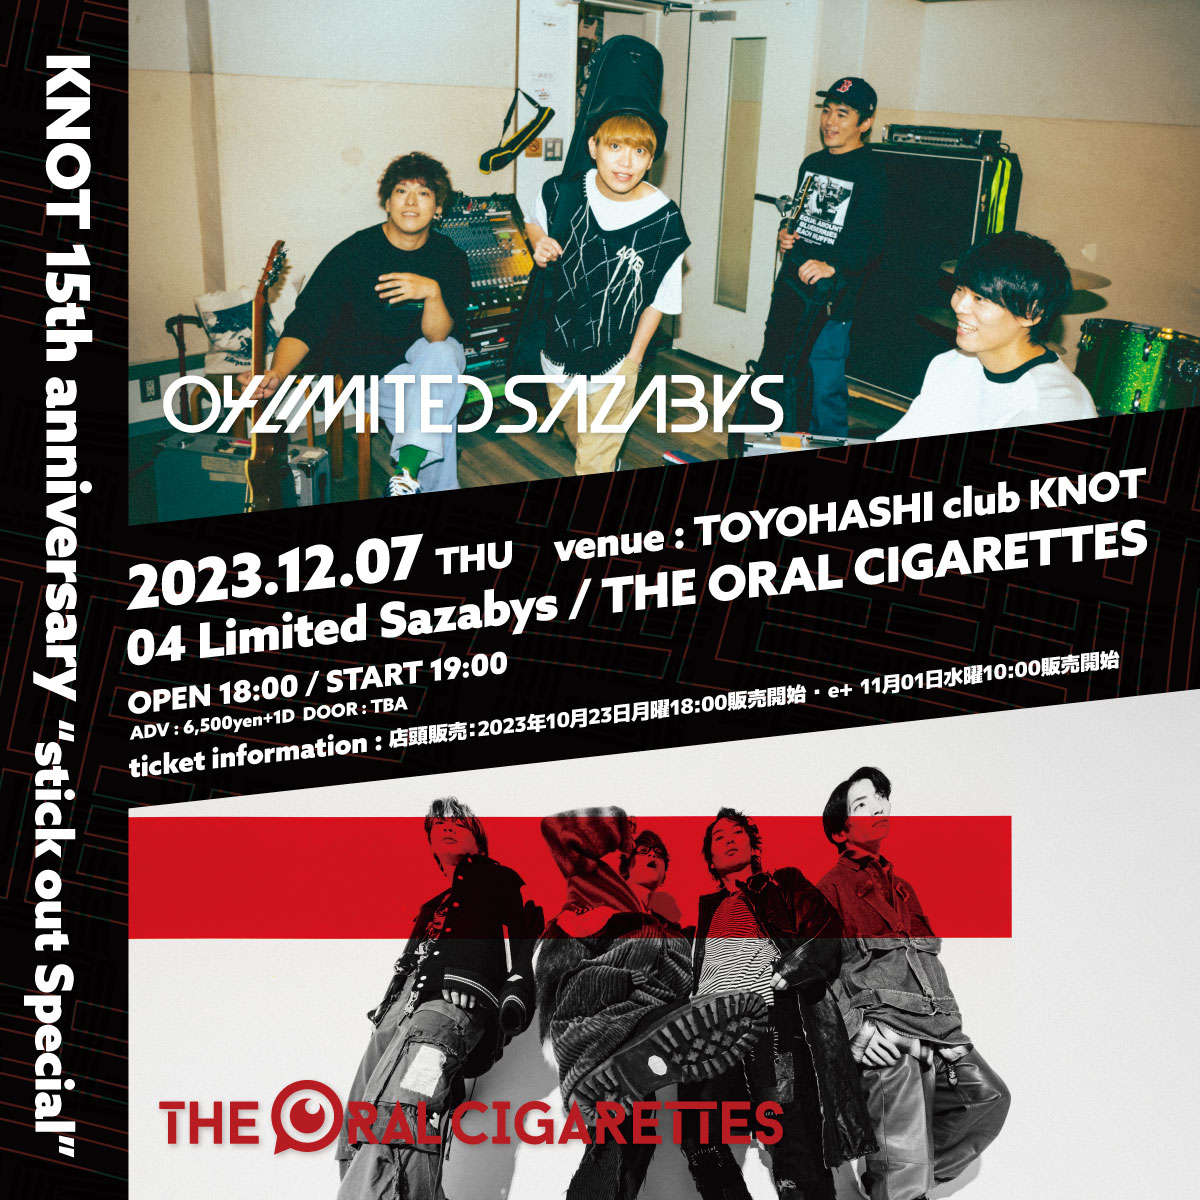 KNOT 15th anniversary "stick out Special" 出演決定！